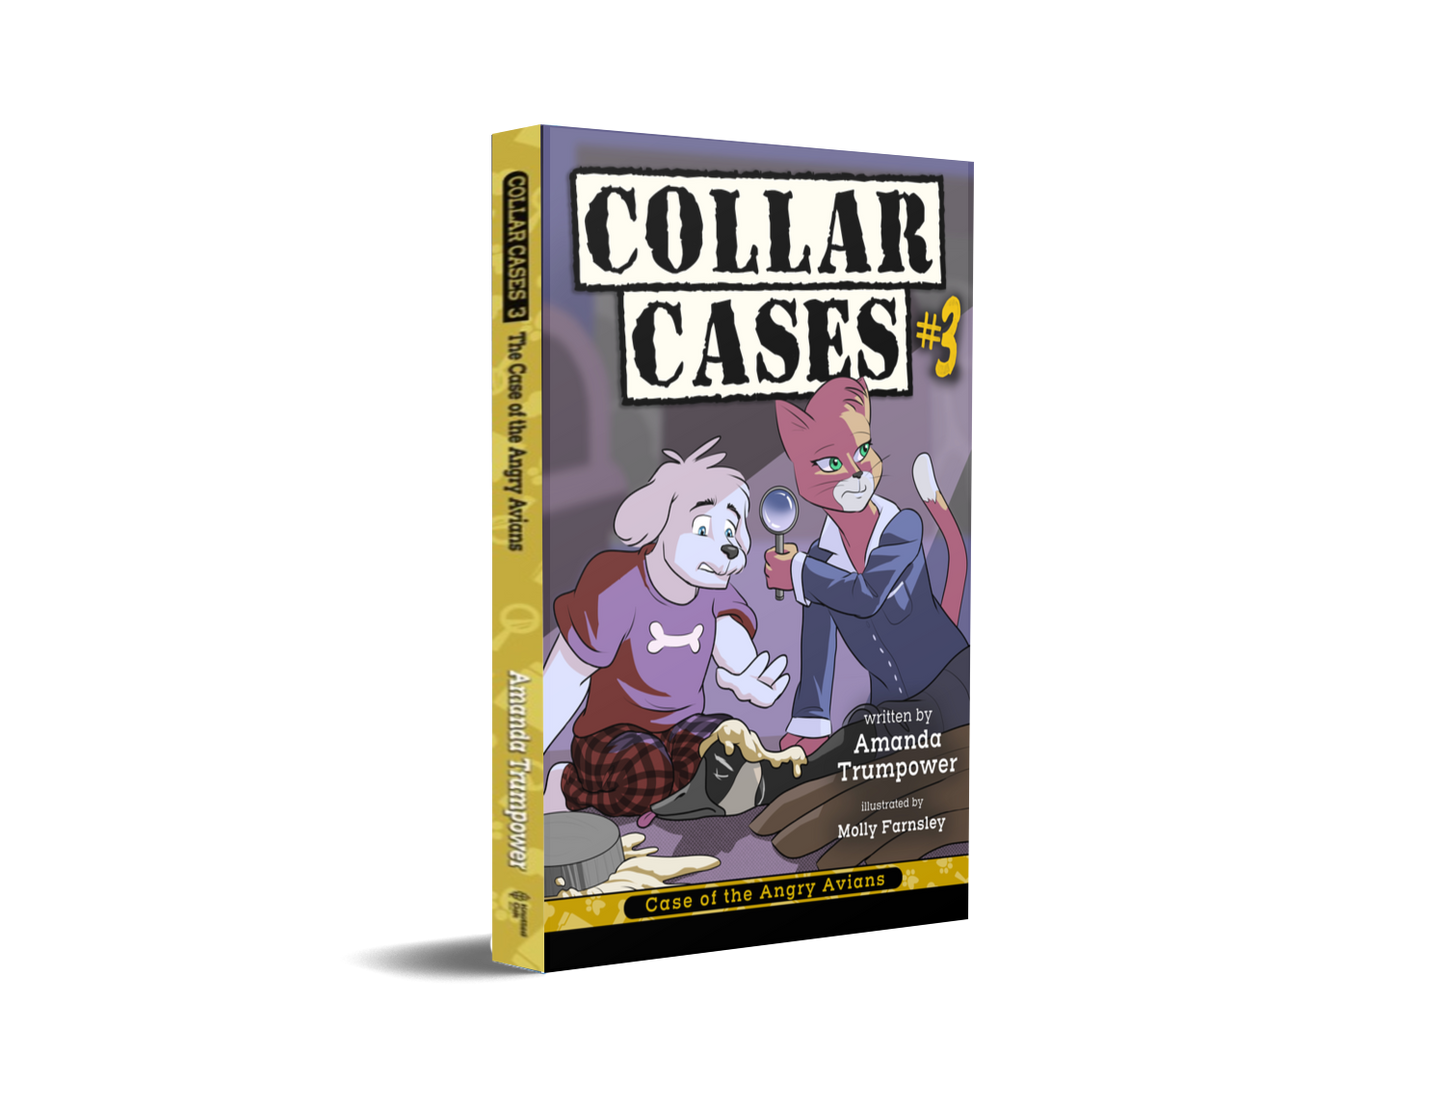 Collar Cases #3: Case of the Angry Avians (second edition)